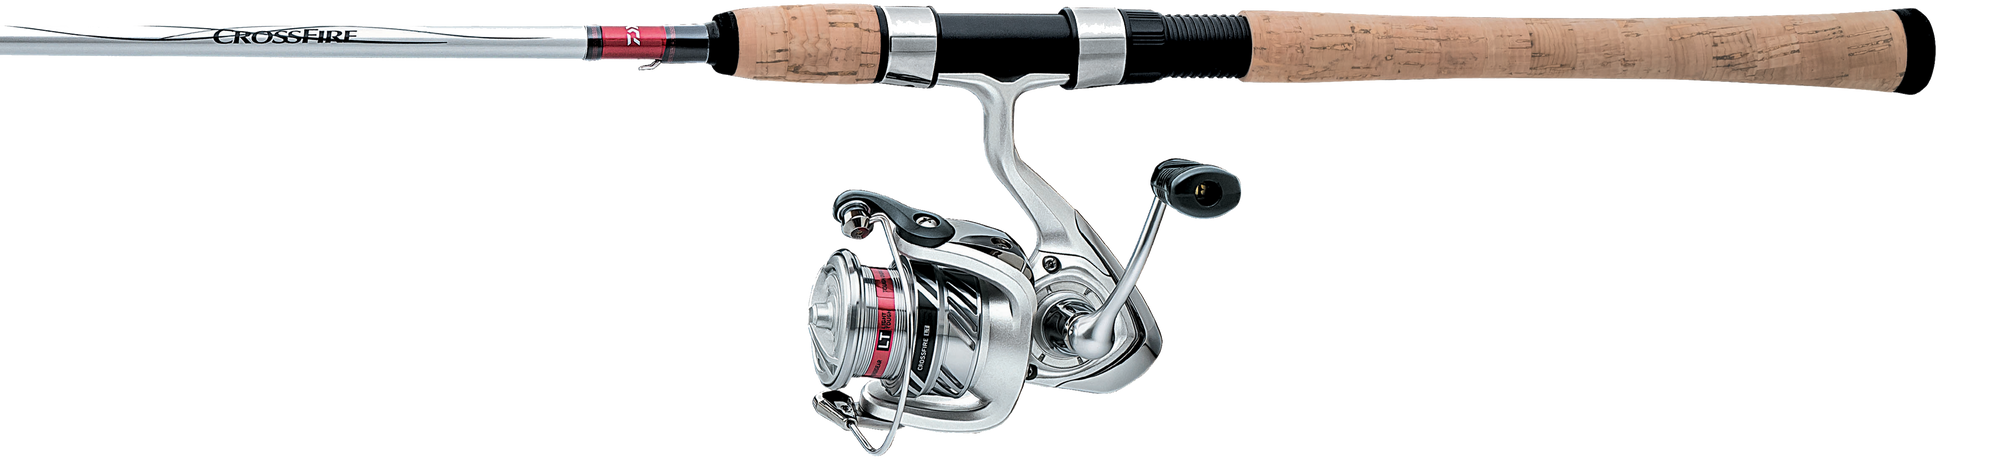 Daiwa Spinning Reel Combo Procaster-X Rod With Sweepfire 1500B